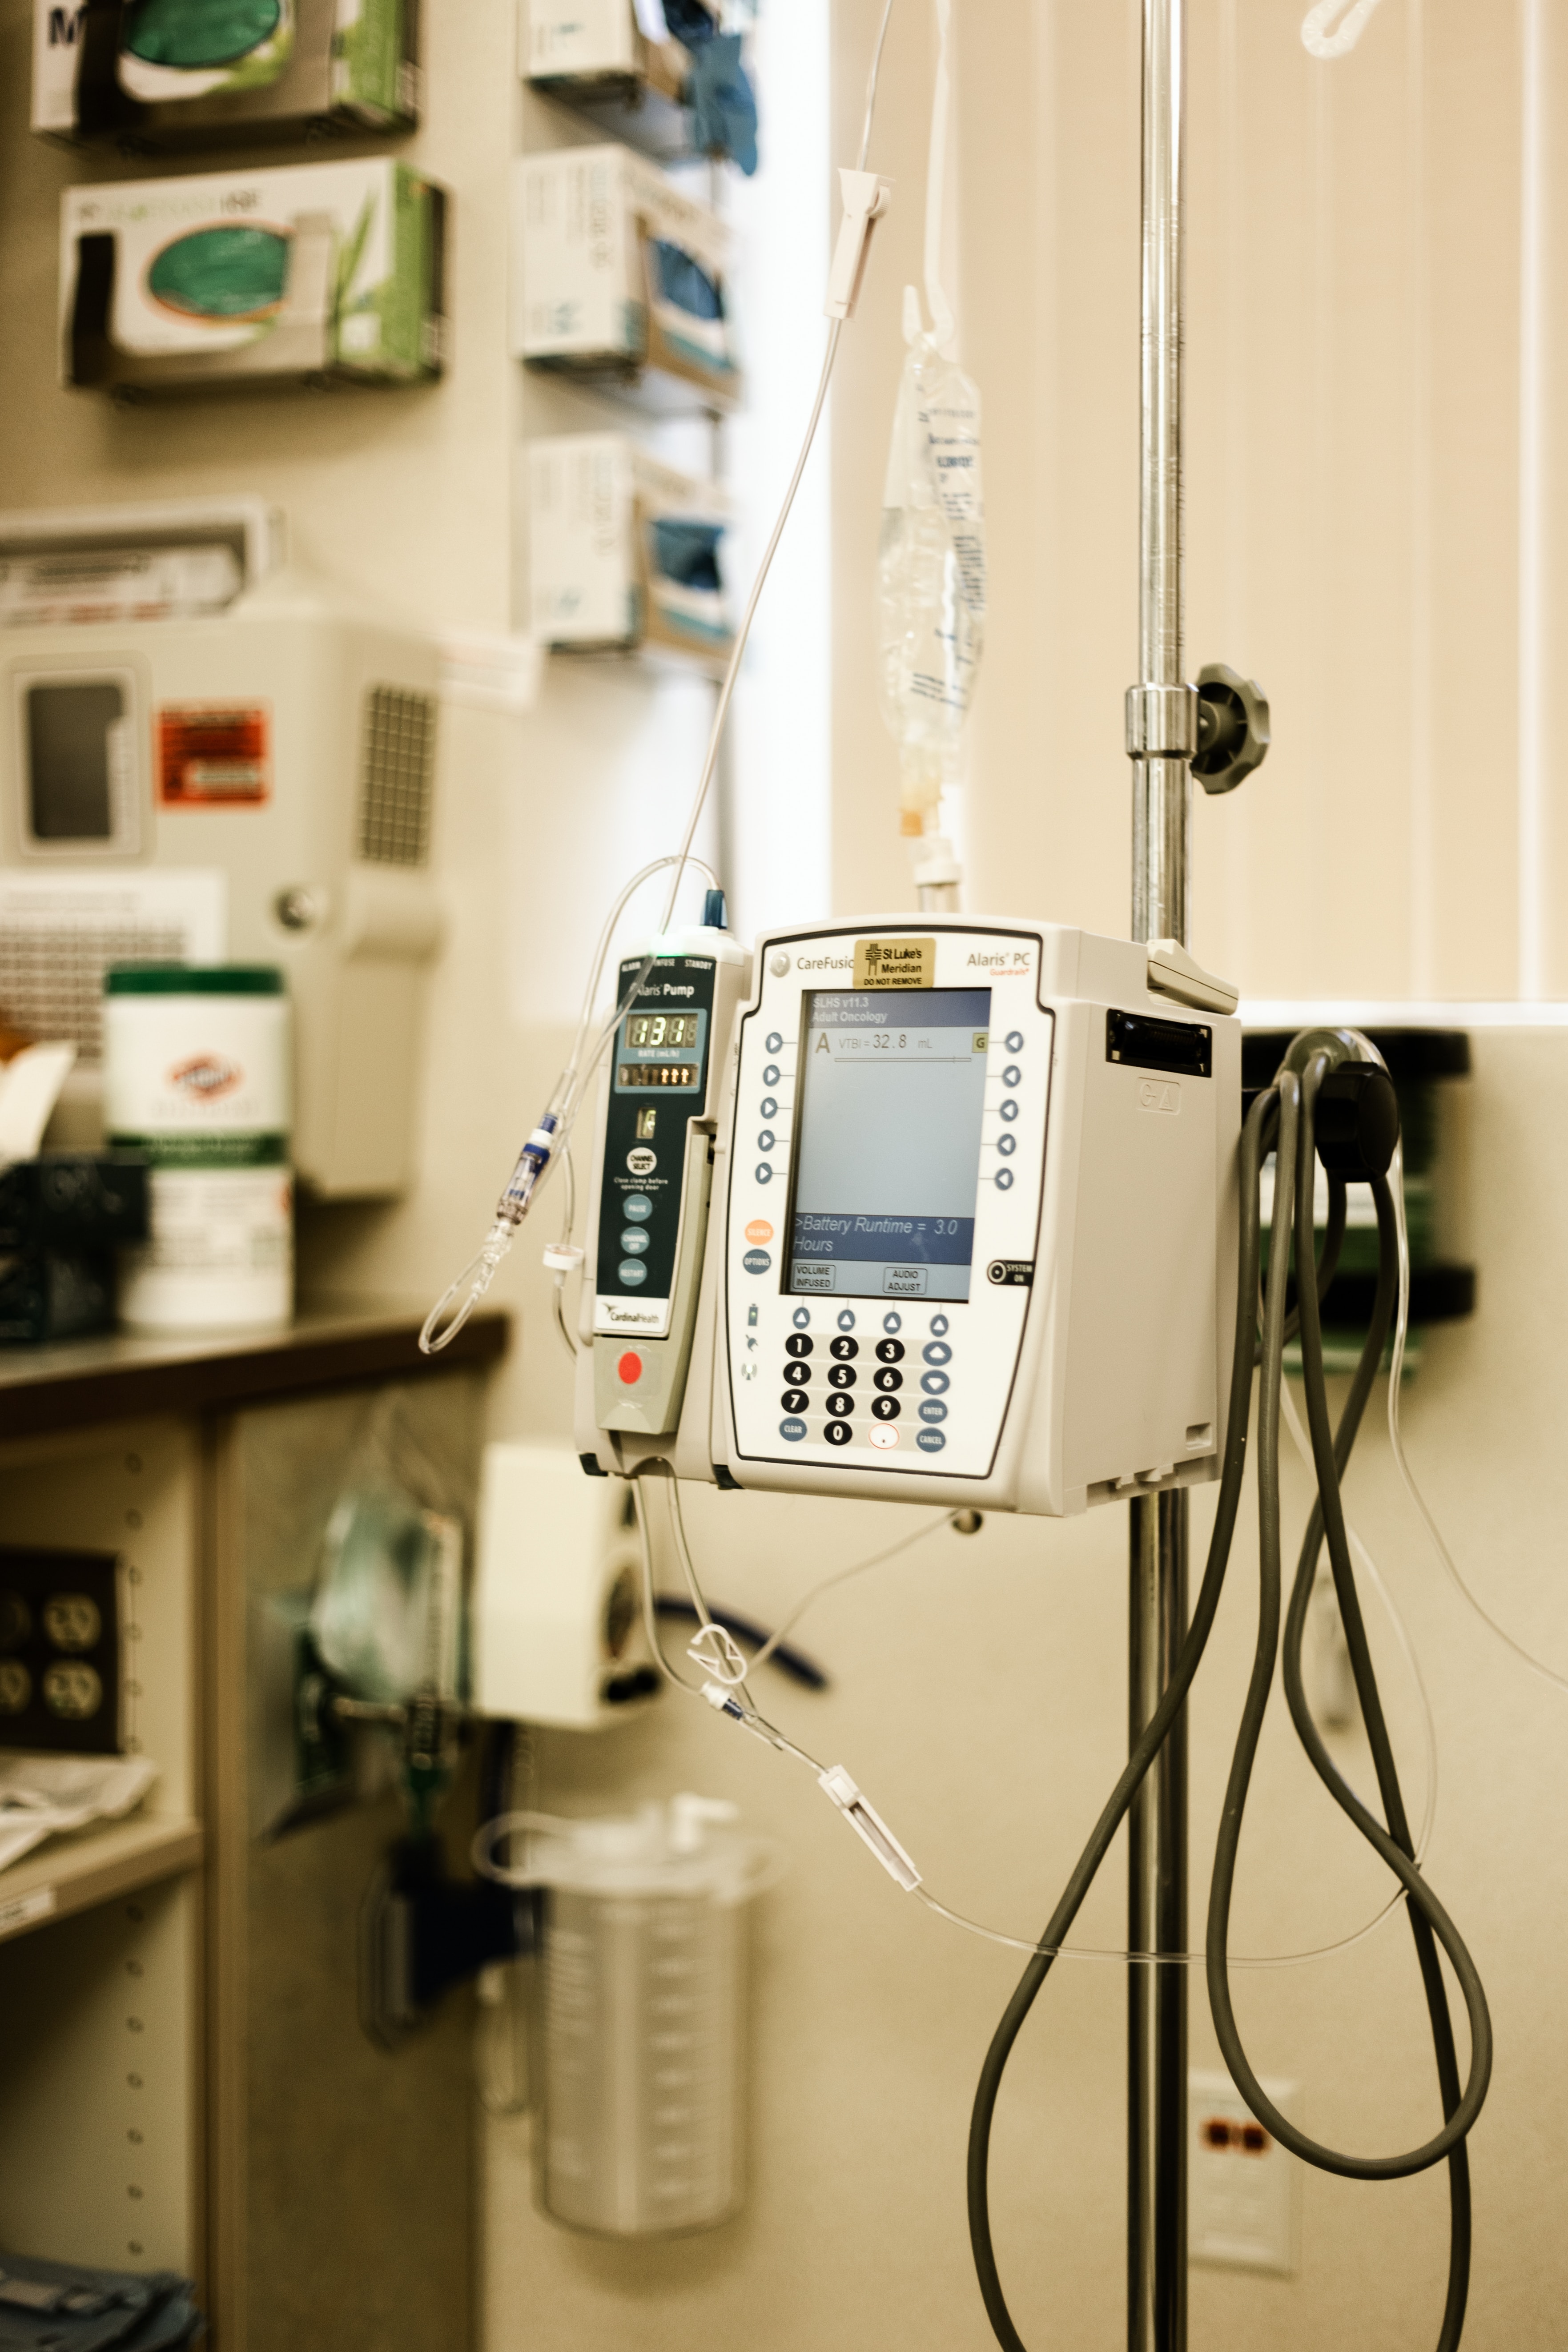 A picture of an IV drip and a heart rate monitor in a hospital room.